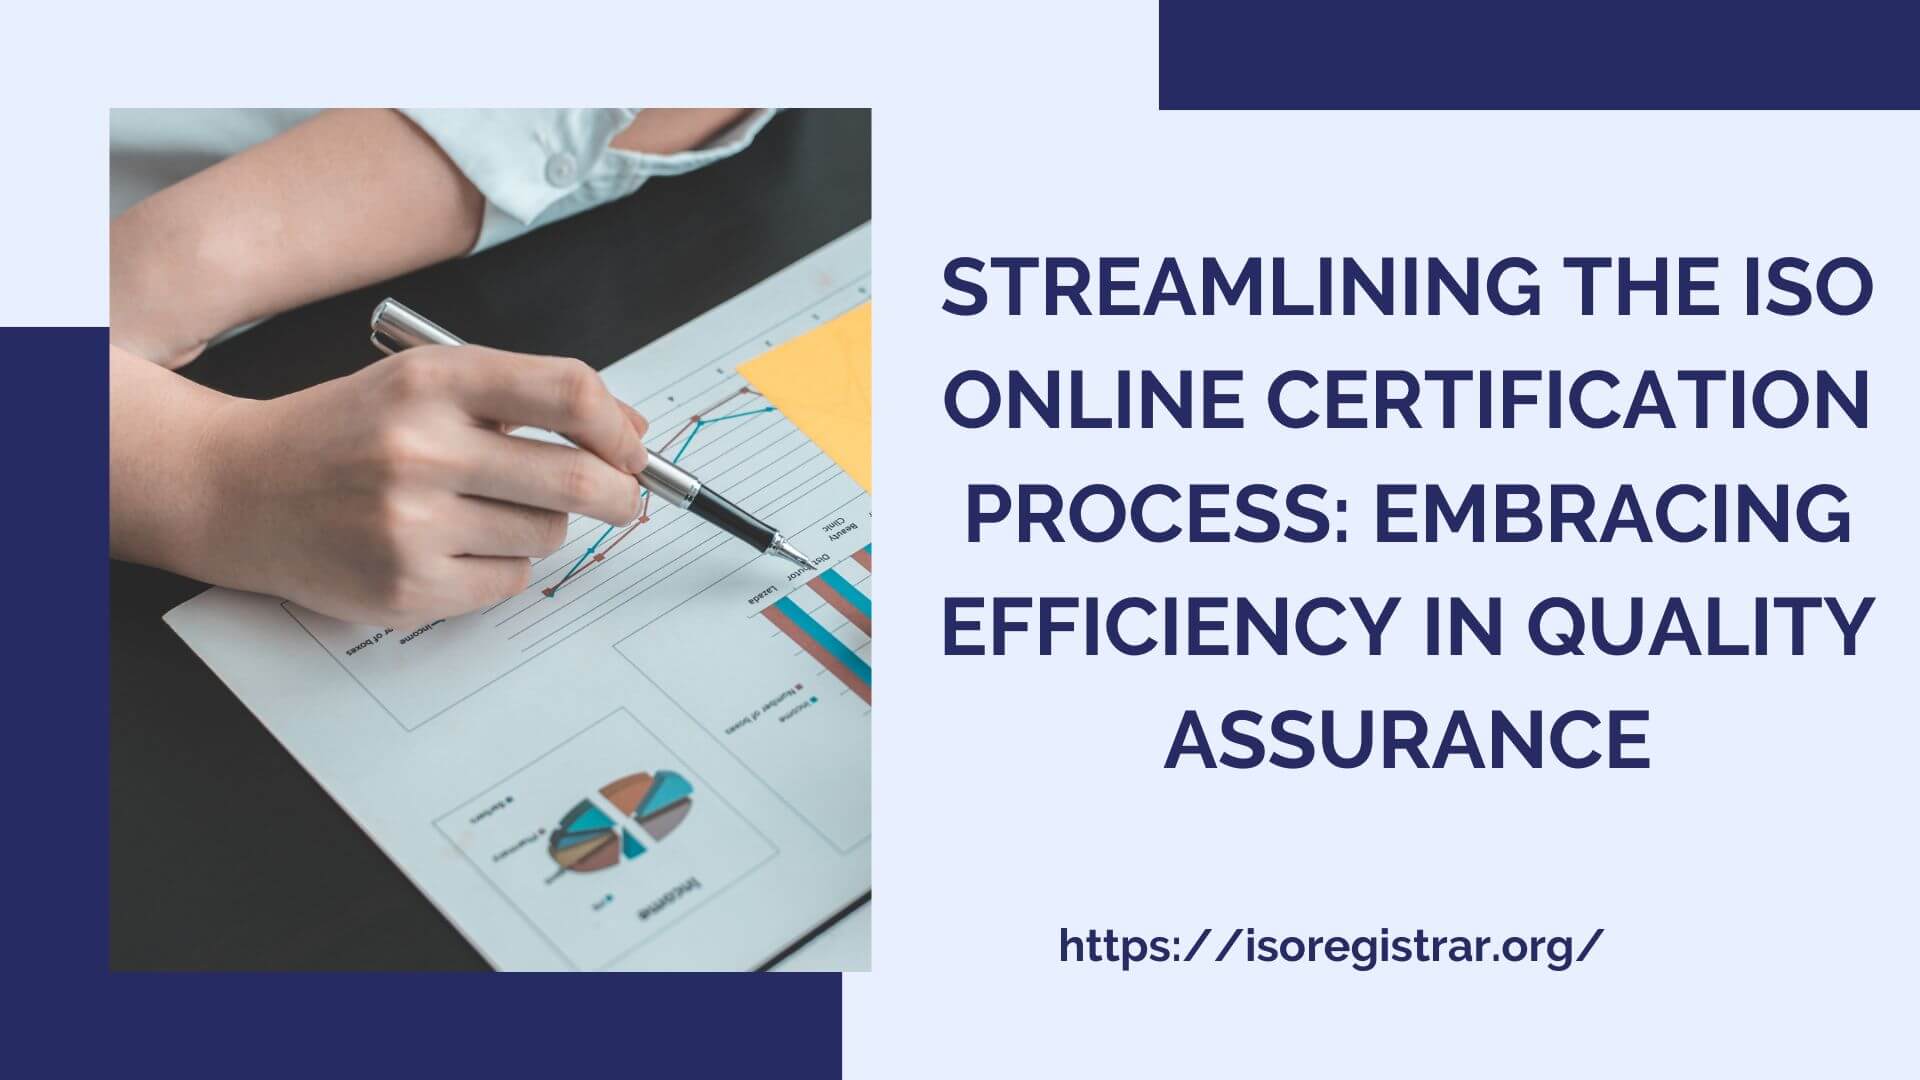 Streamlining the ISO Online Certification Process: Embracing Efficiency in Quality Assurance